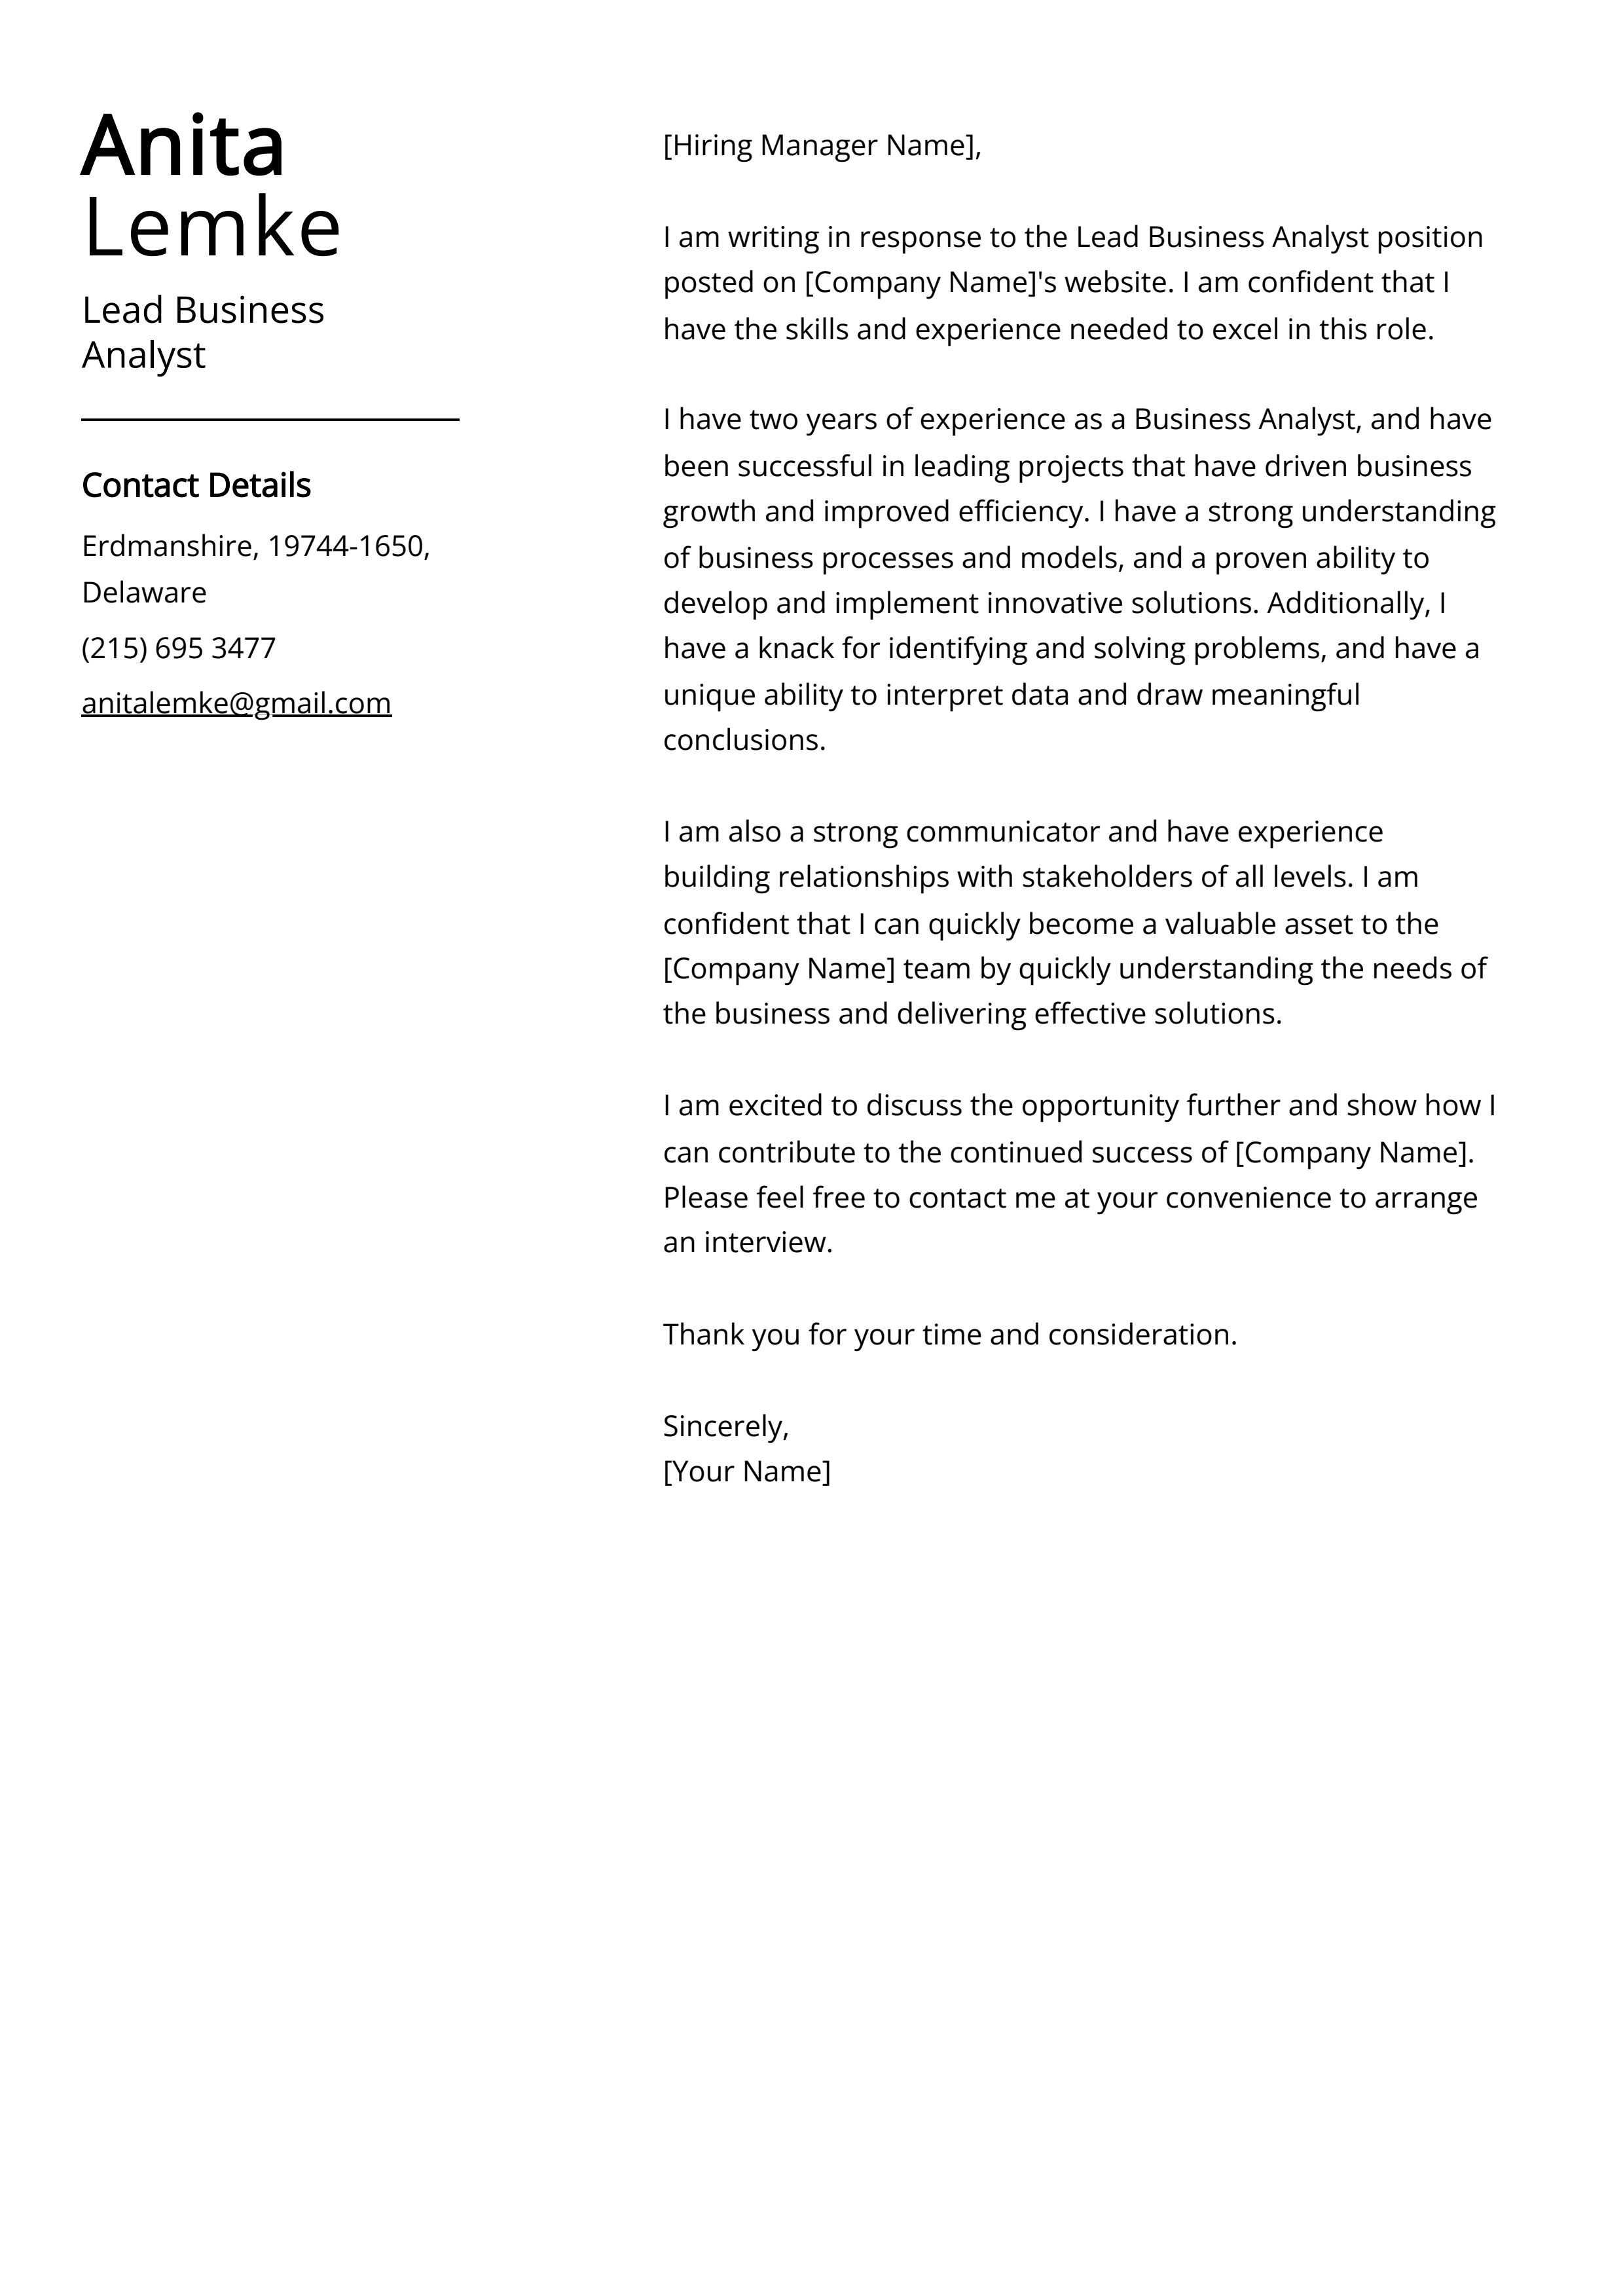 Lead Business Analyst Cover Letter Example